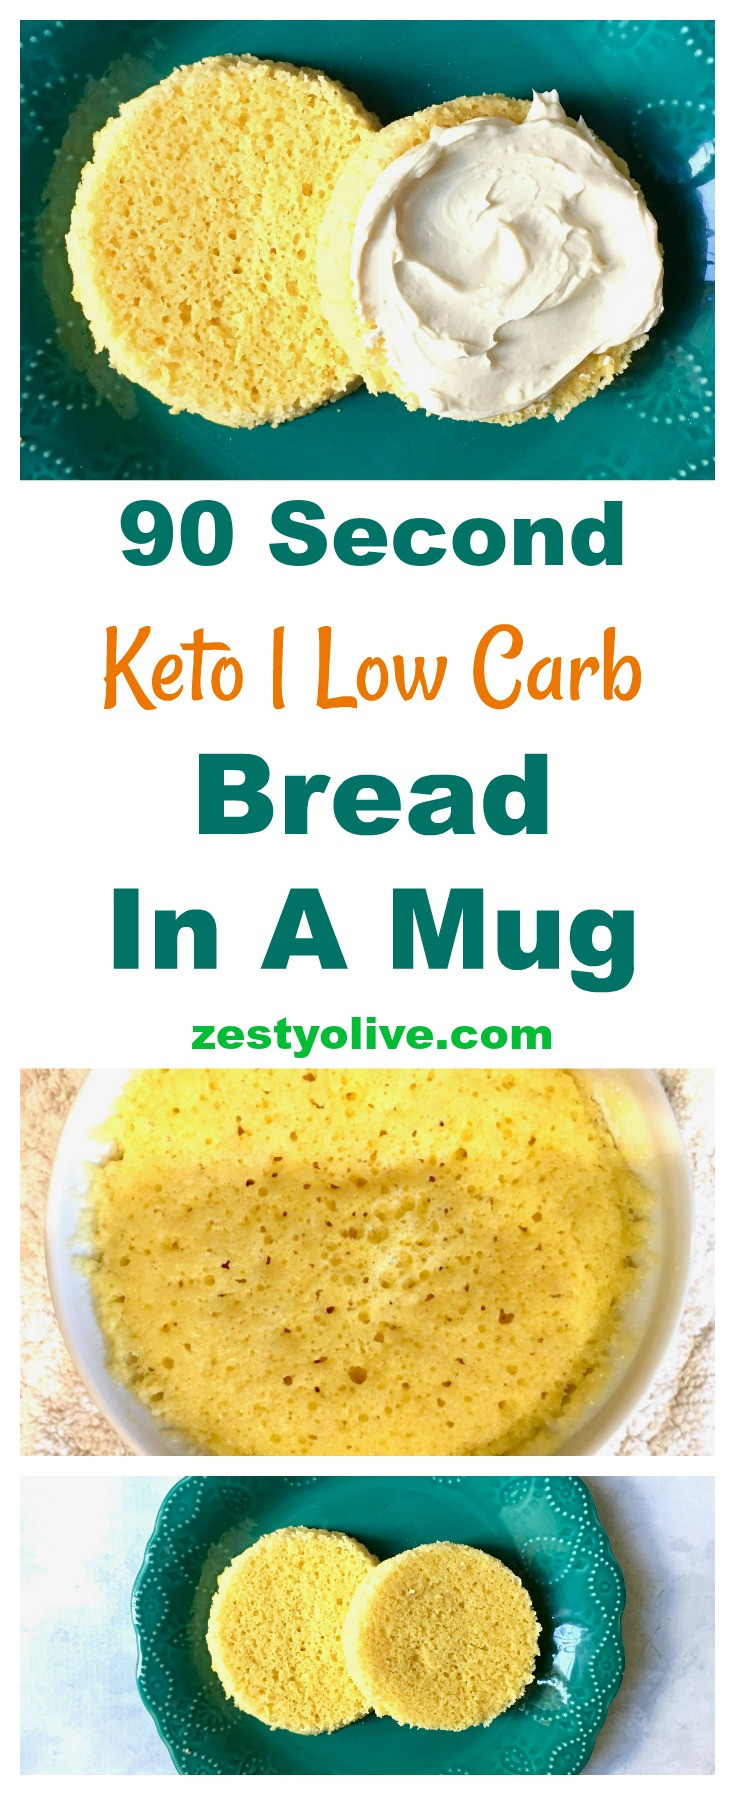 90 Second Keto Bread In A Mug
 How To Make 90 Second Keto Low Carb Bread In A Mug Zesty